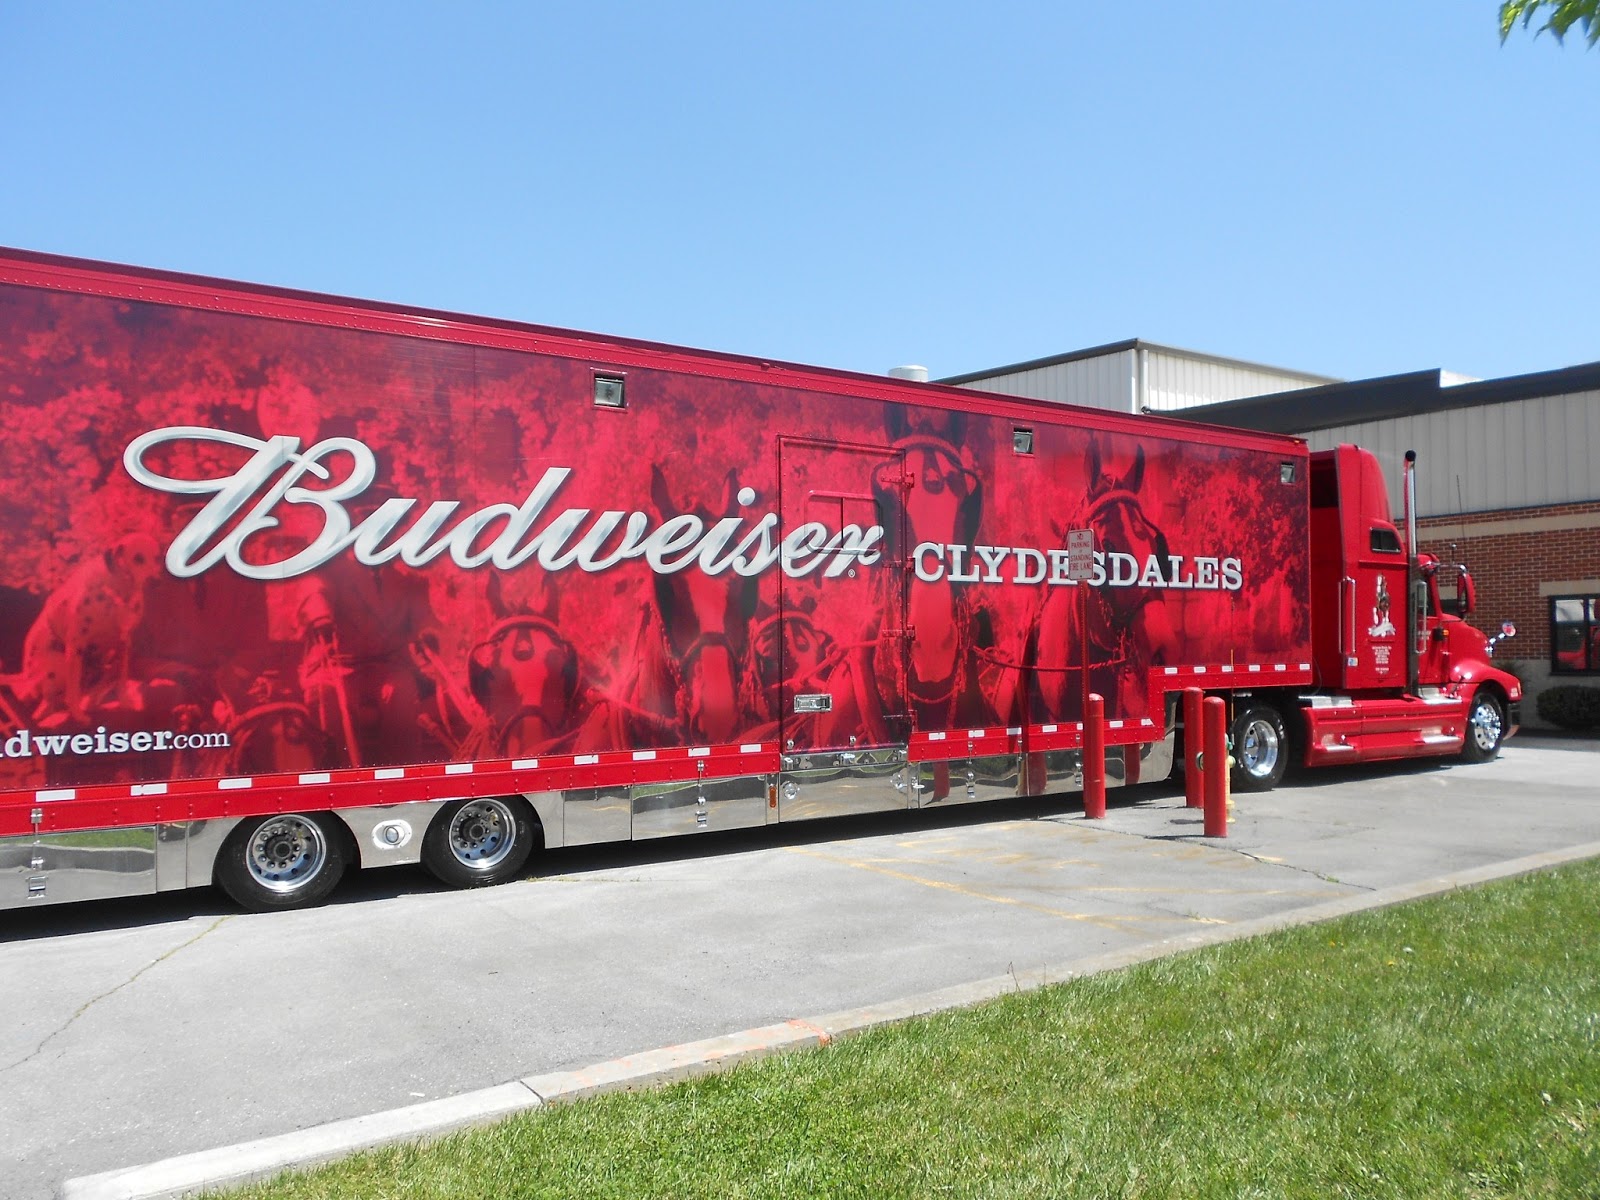 Budweiser Clydesdale Horses Wallpaper The Clydesdales